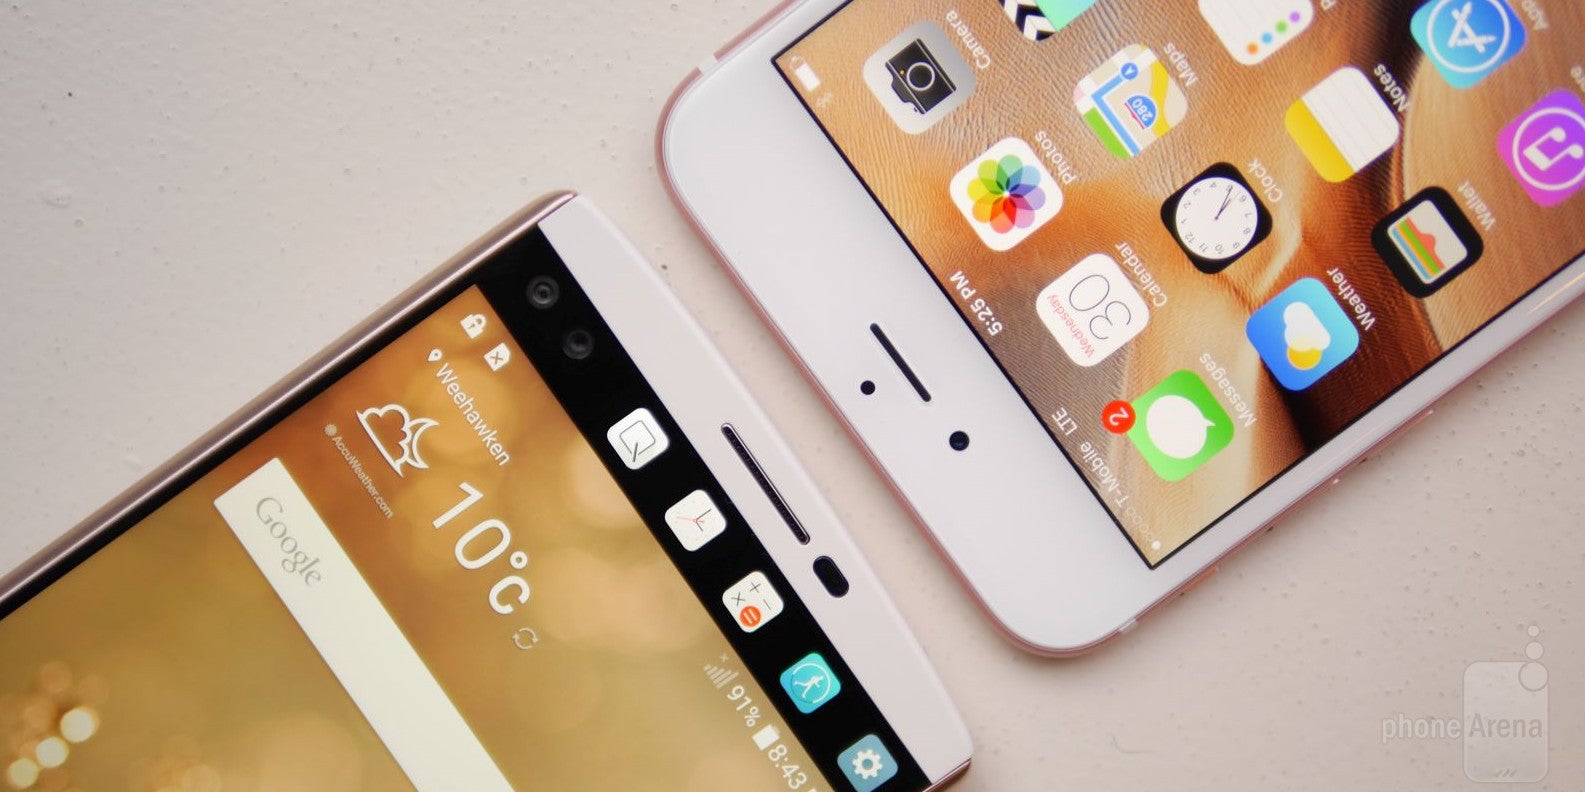 LG V10 vs Apple iPhone 6s Plus: first look